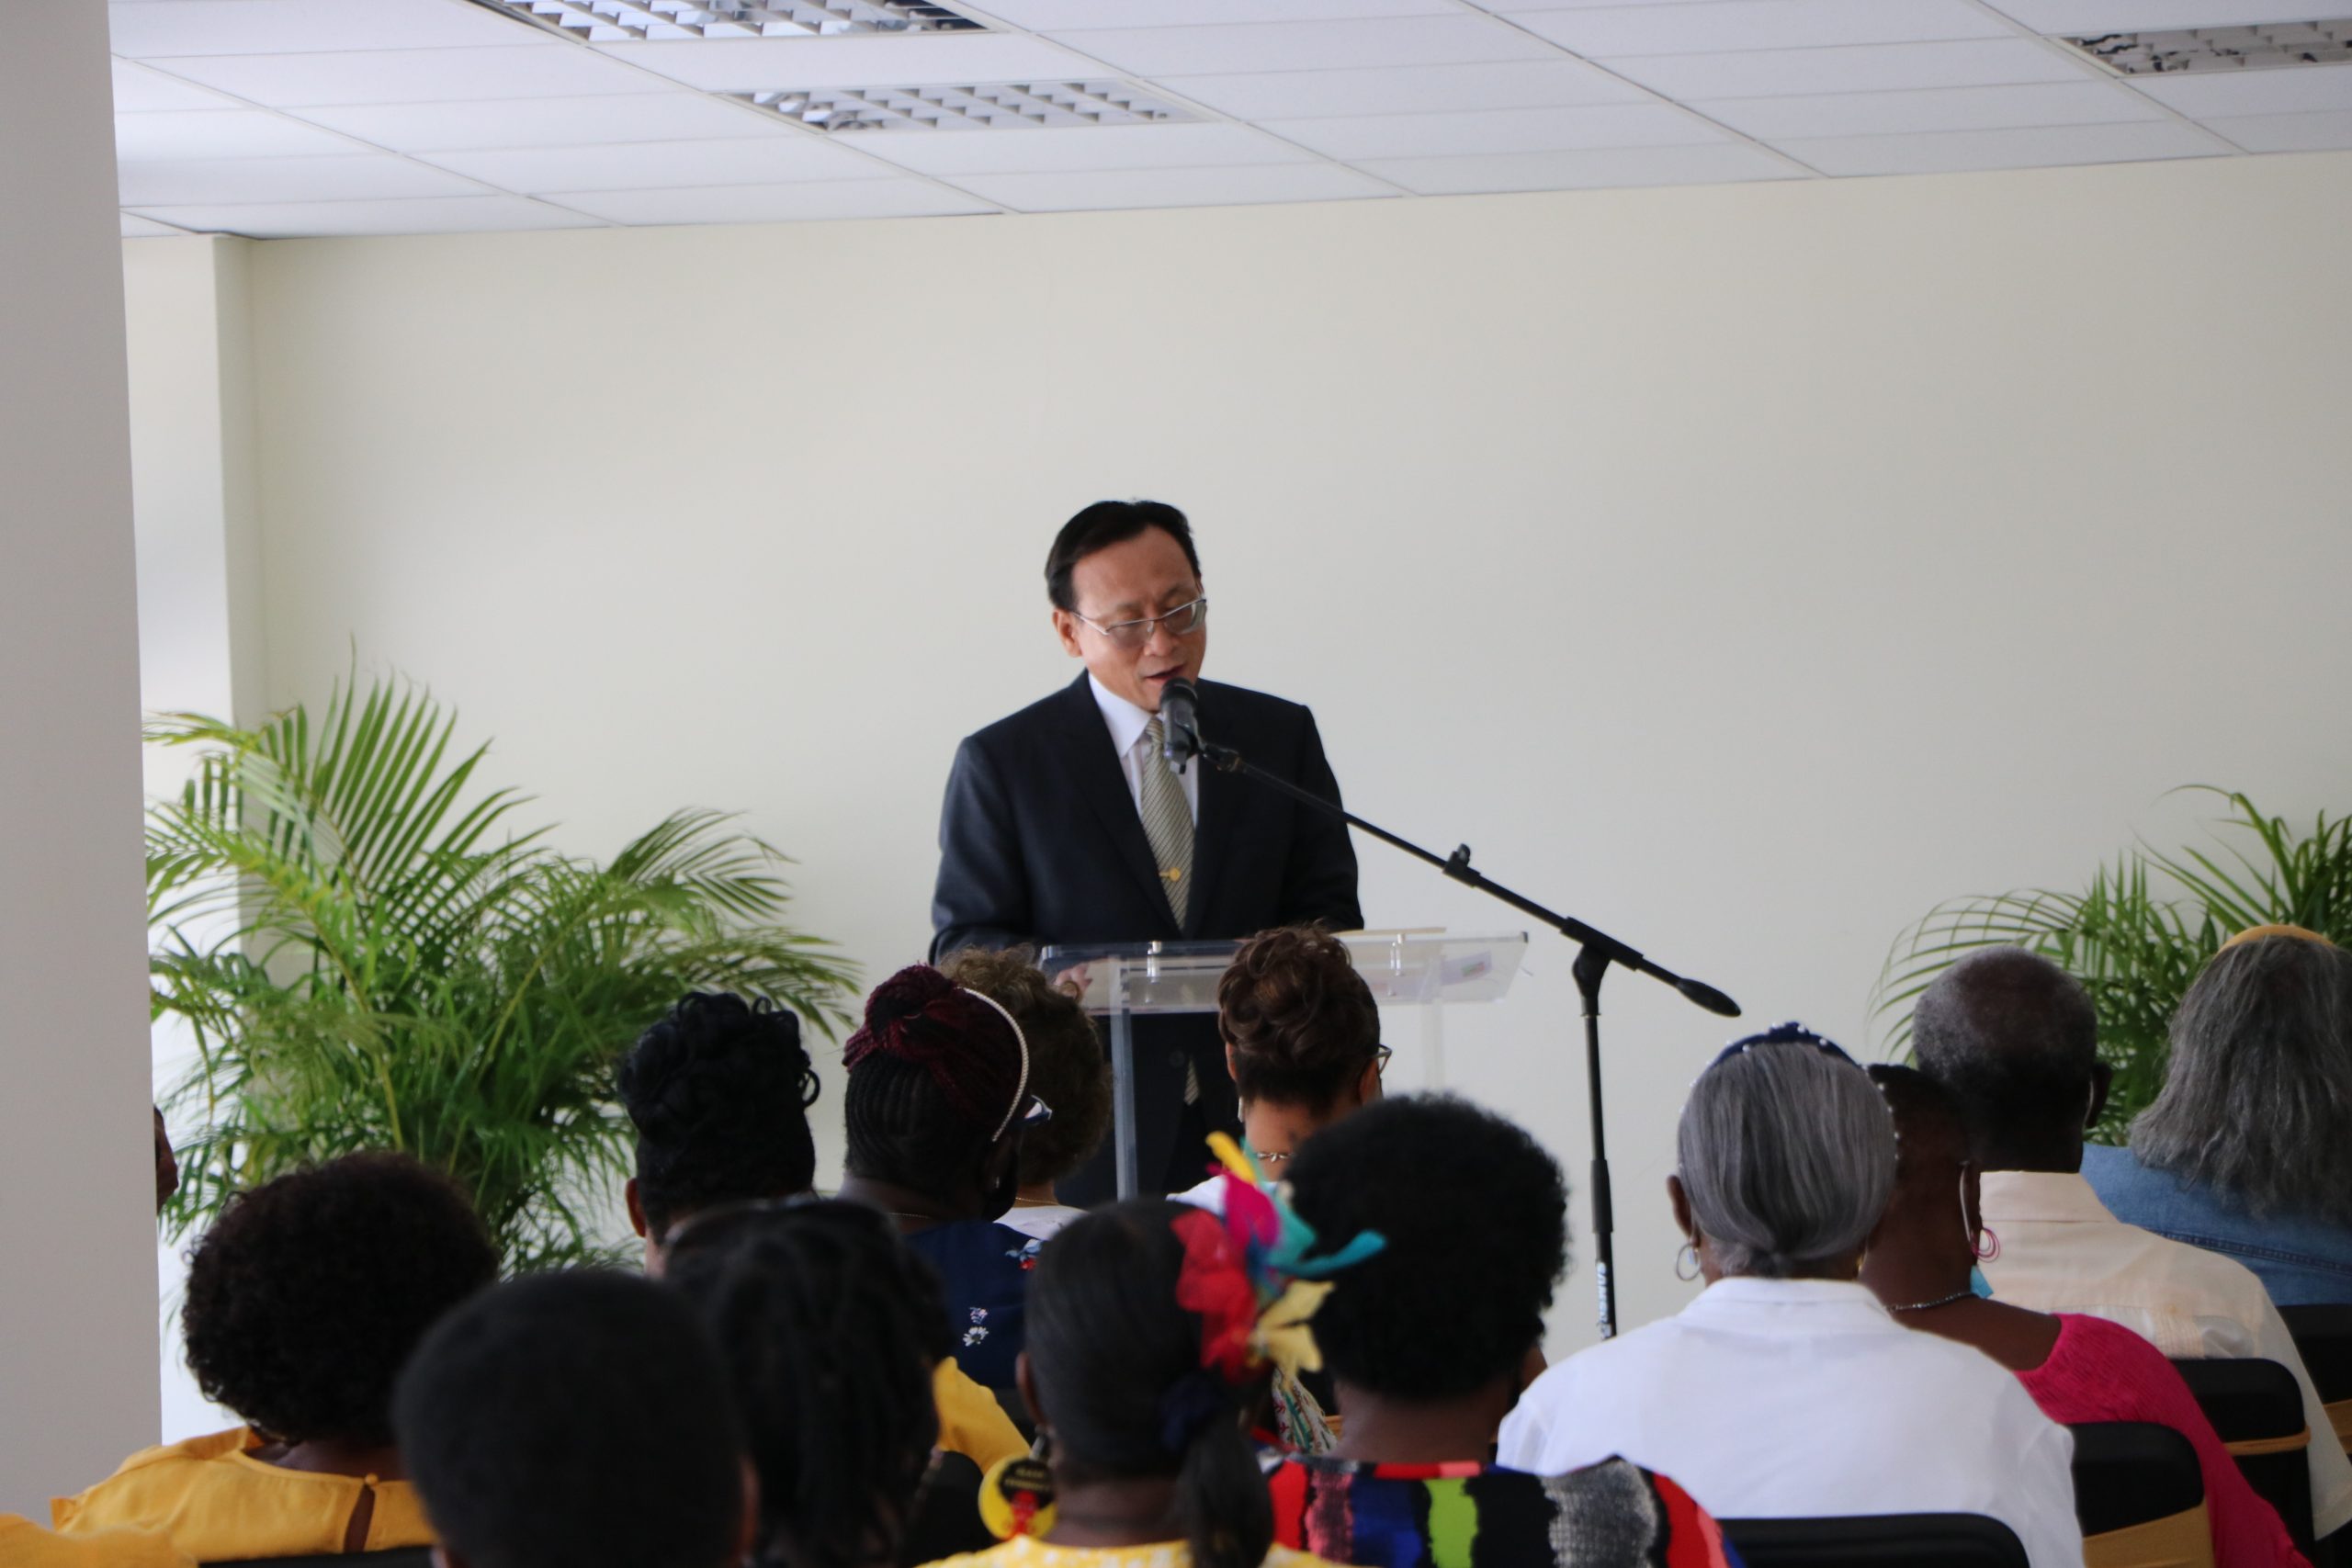 Republic of China (Taiwan) Resident Ambassador to St. Kitts and Nevis His Excellency Michael Lin, delivering remarks at the opening ceremony of Gender Expo ’22 at the Malcolm Guishard Recreational Park on March 18, 2022